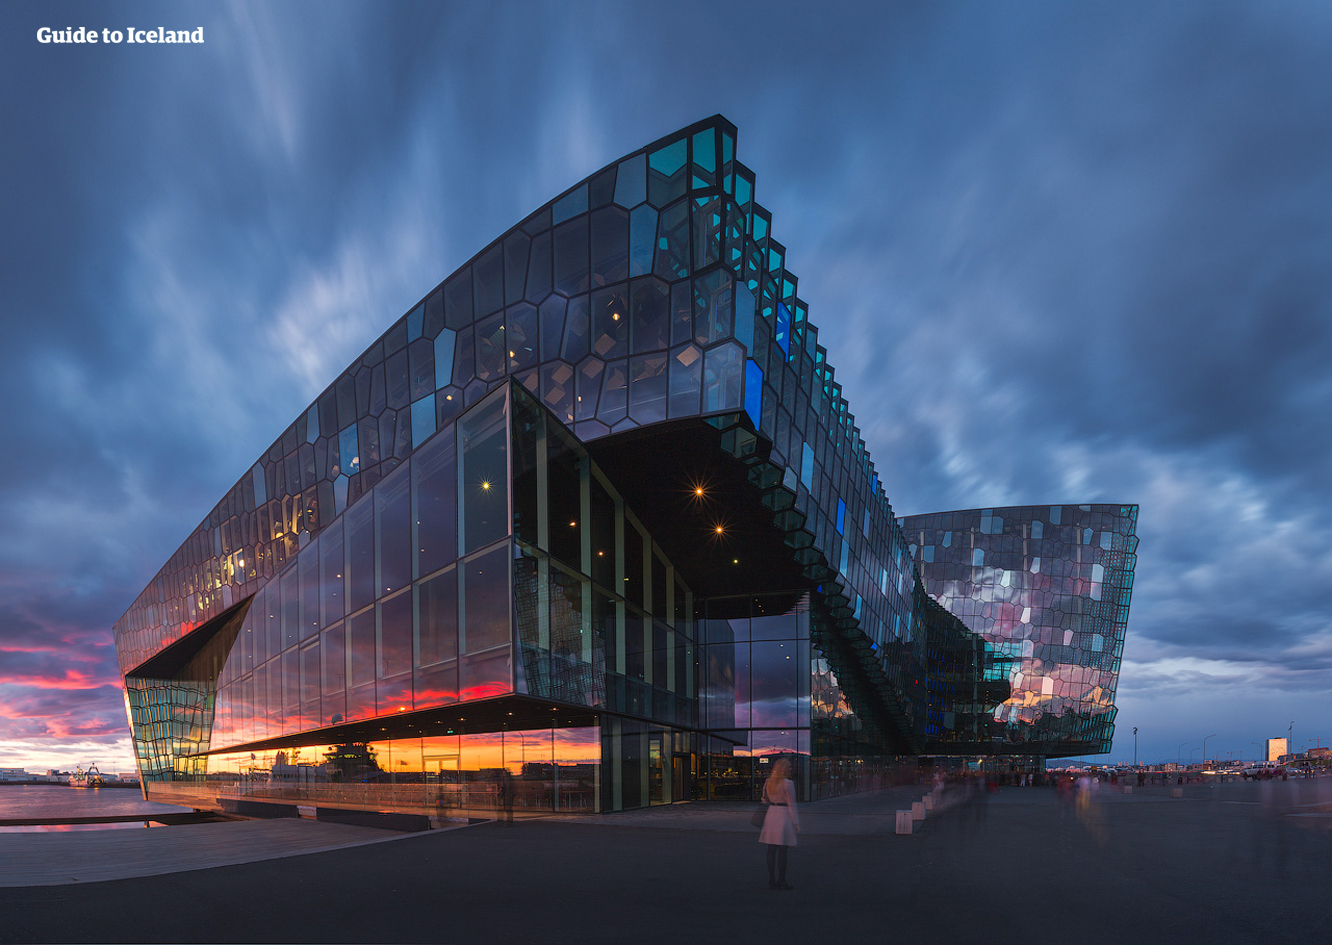 Harpa is a concert hall and theatre venue.